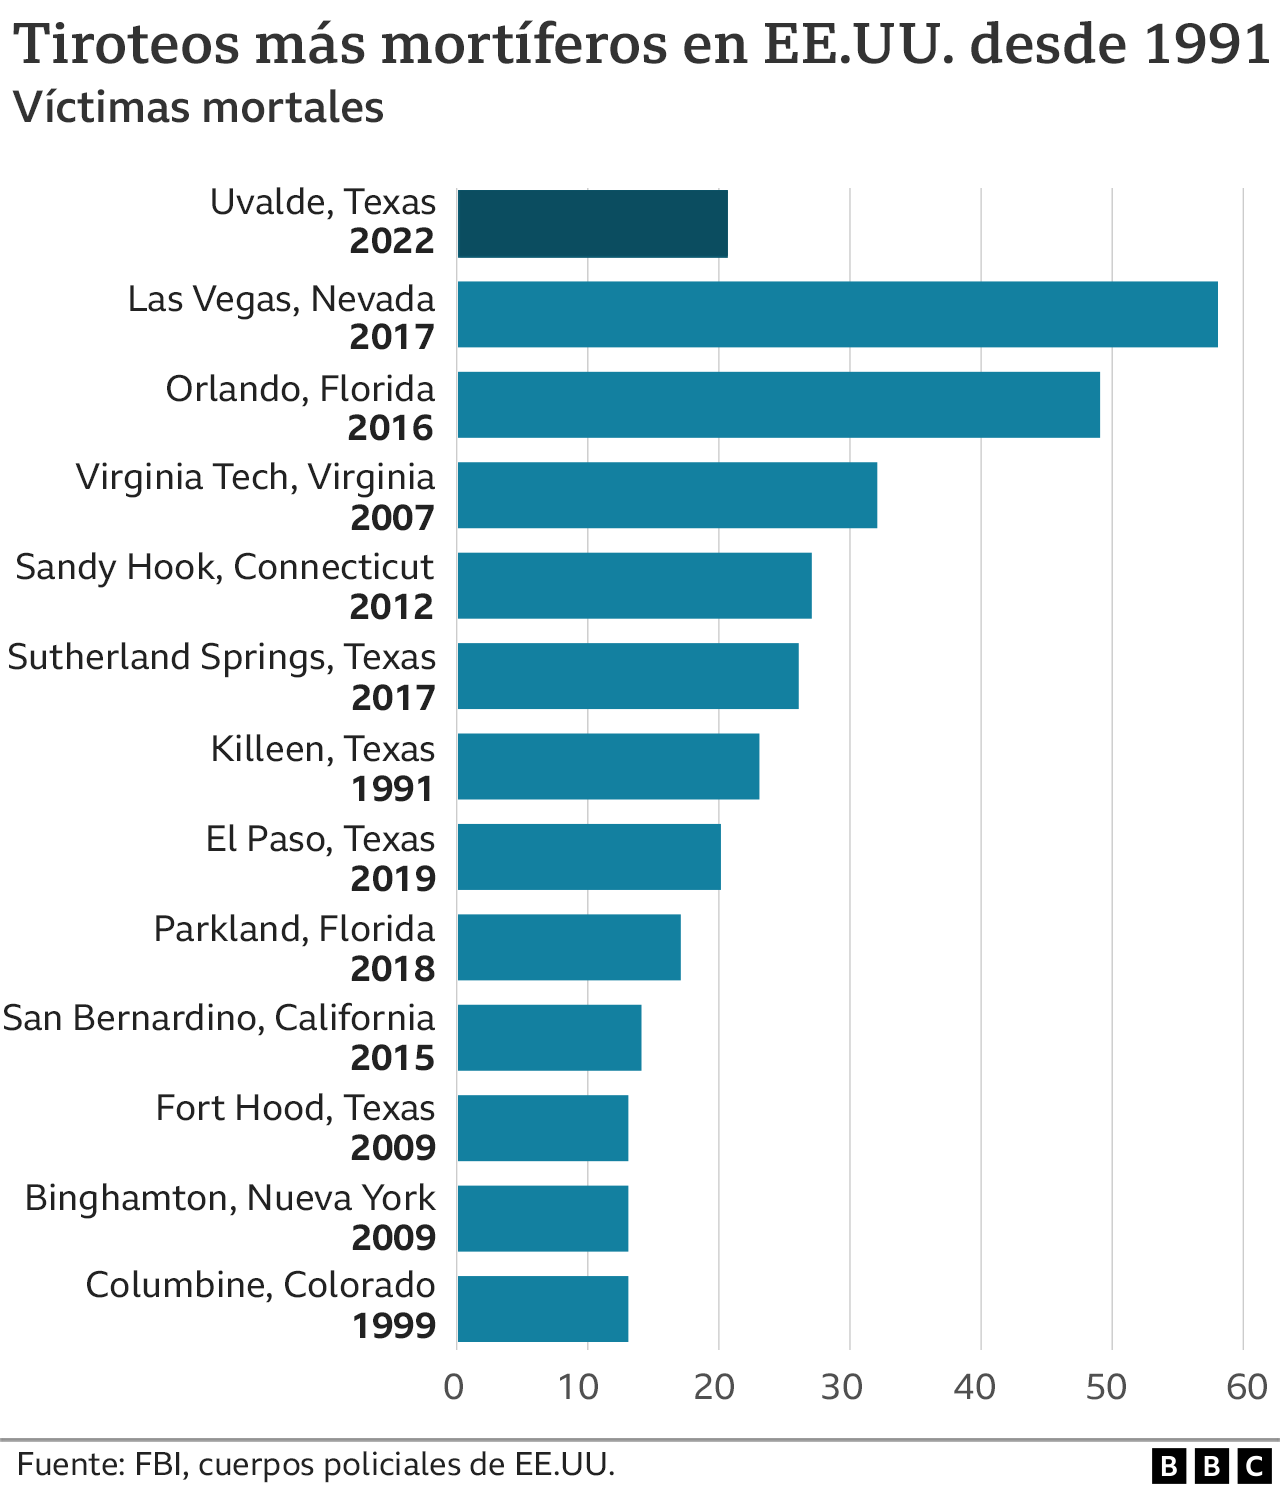 Deadliest shootings in the United States since 1991.